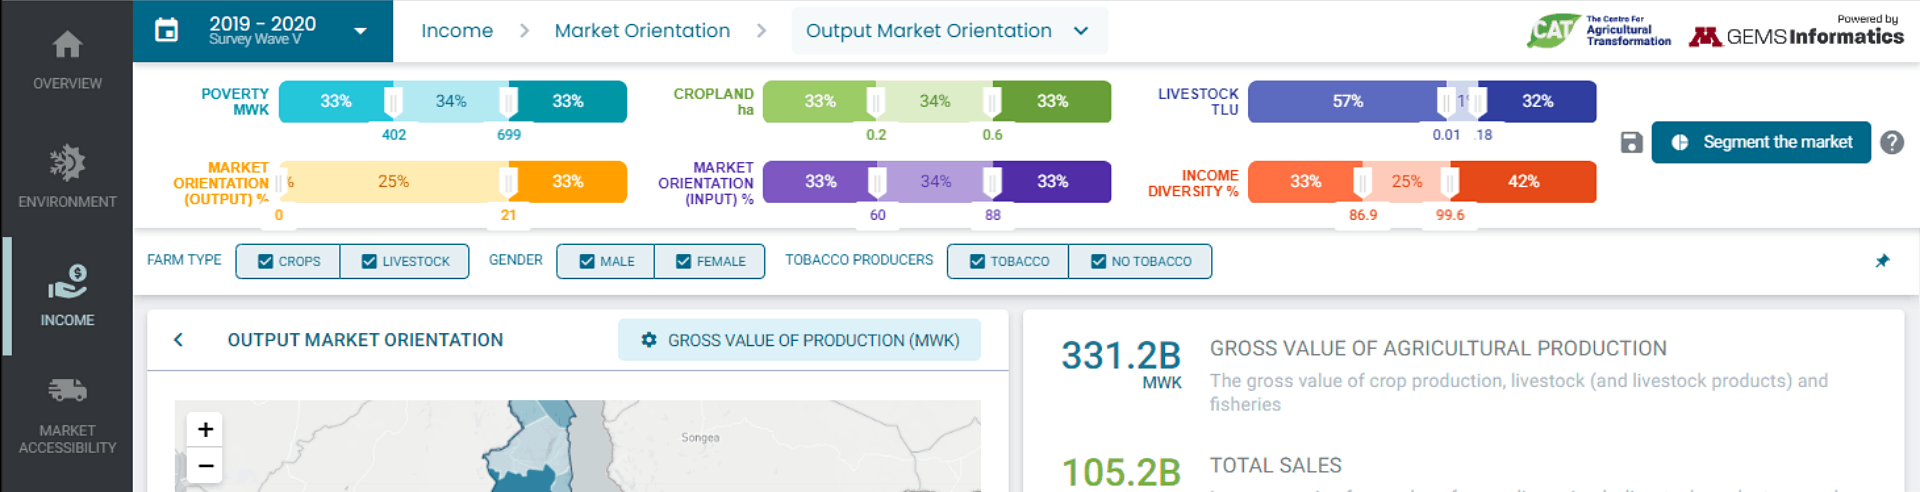 A screenshot of the Market Segmentation Tool dashboard showing the “segment the market” functionality for the output market orientation variable.